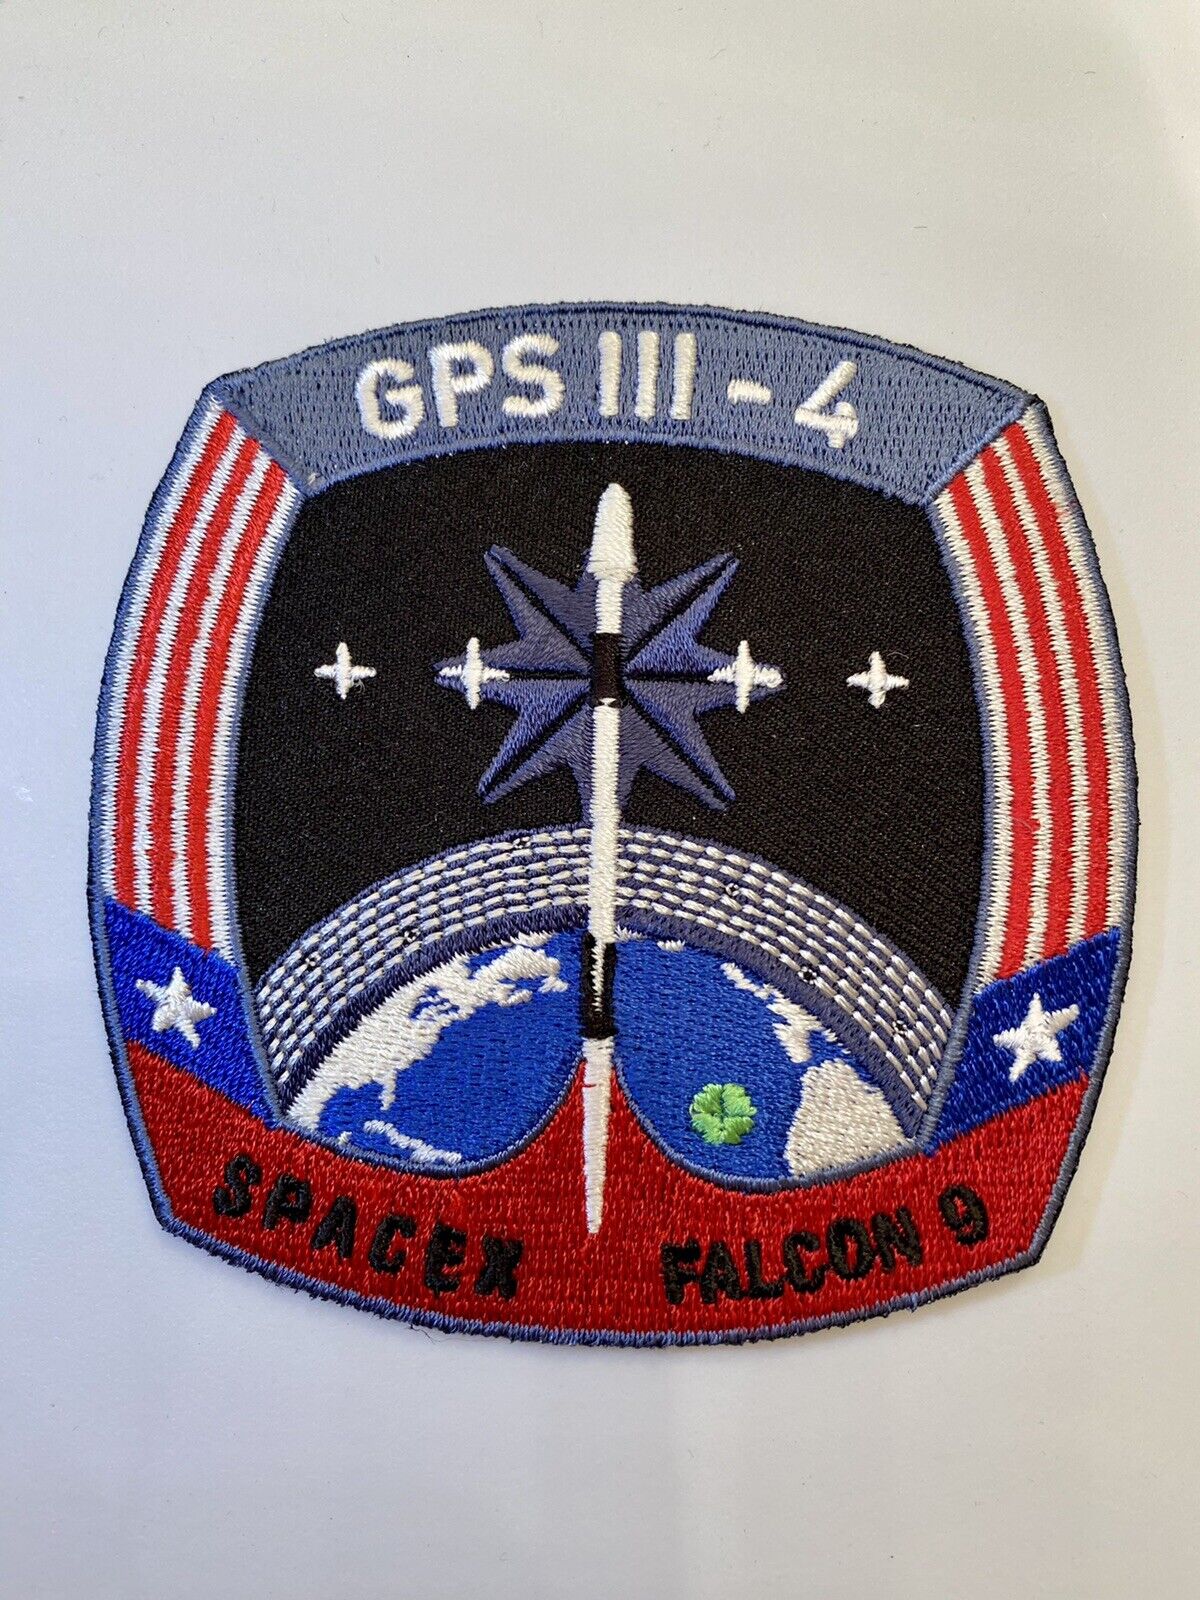 GPS SpaceX Mission GPSIII-SV04 SpaceX Falcon 9 logo Crewed Flight Patch